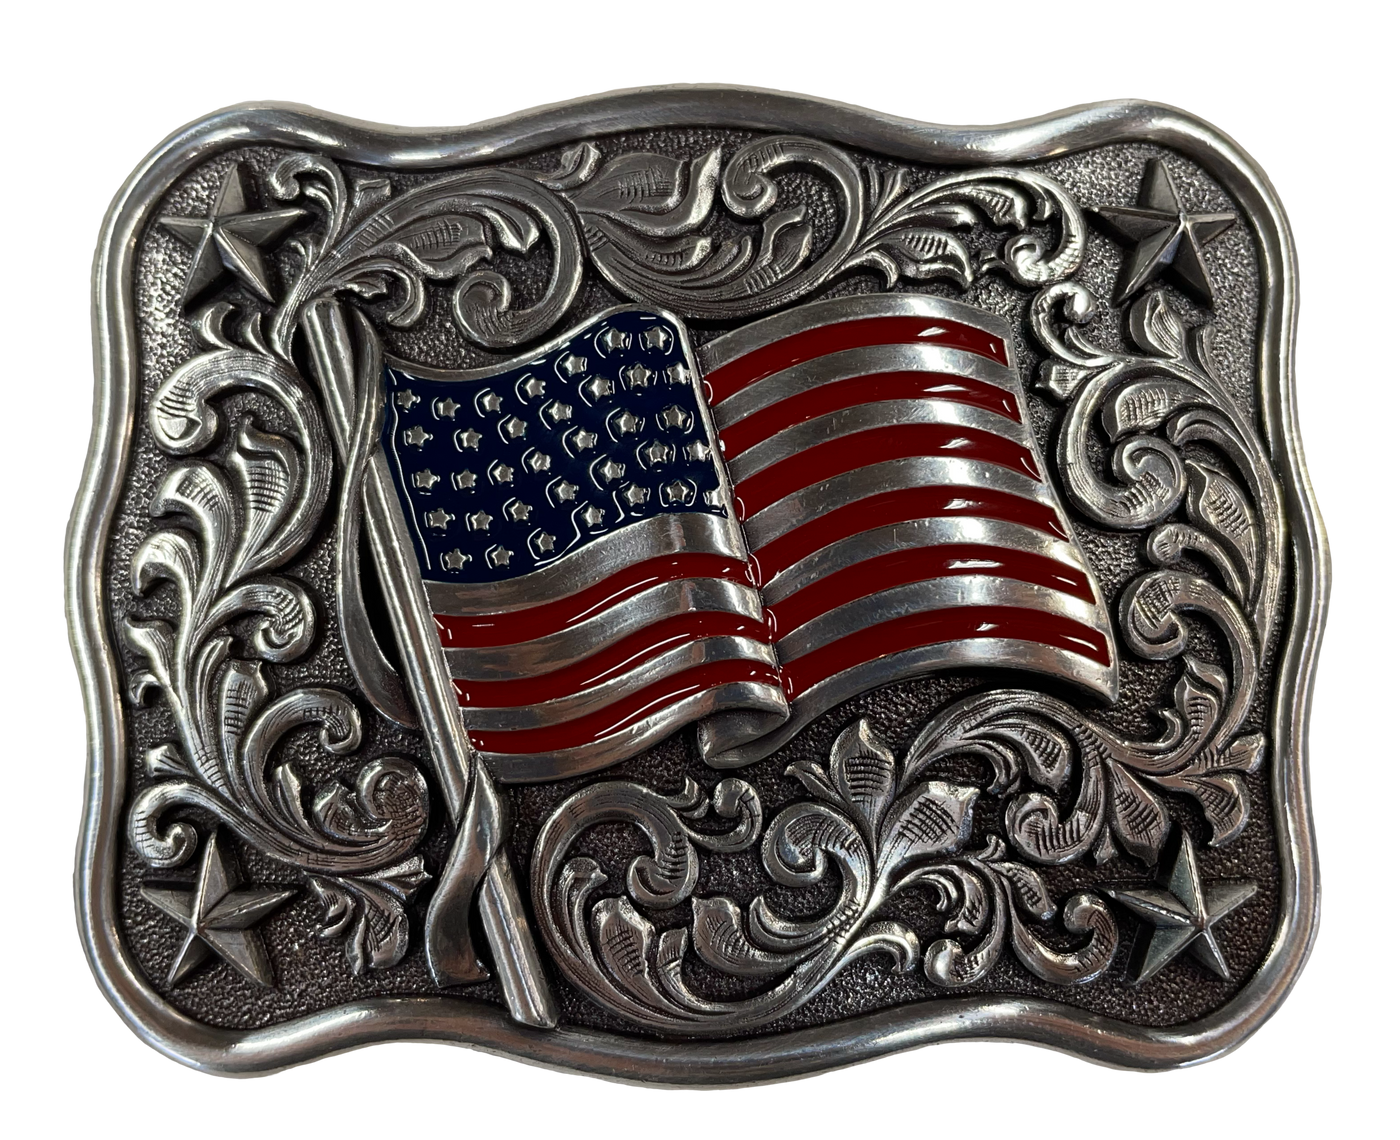 Nocona belt buckle Western style with Flying American Flag pictured Dimensions are 3" tall by 3 3/4" wide Add a patriotic look to your style! Available online and at our shop just outside Nashville in Smyrna, TN